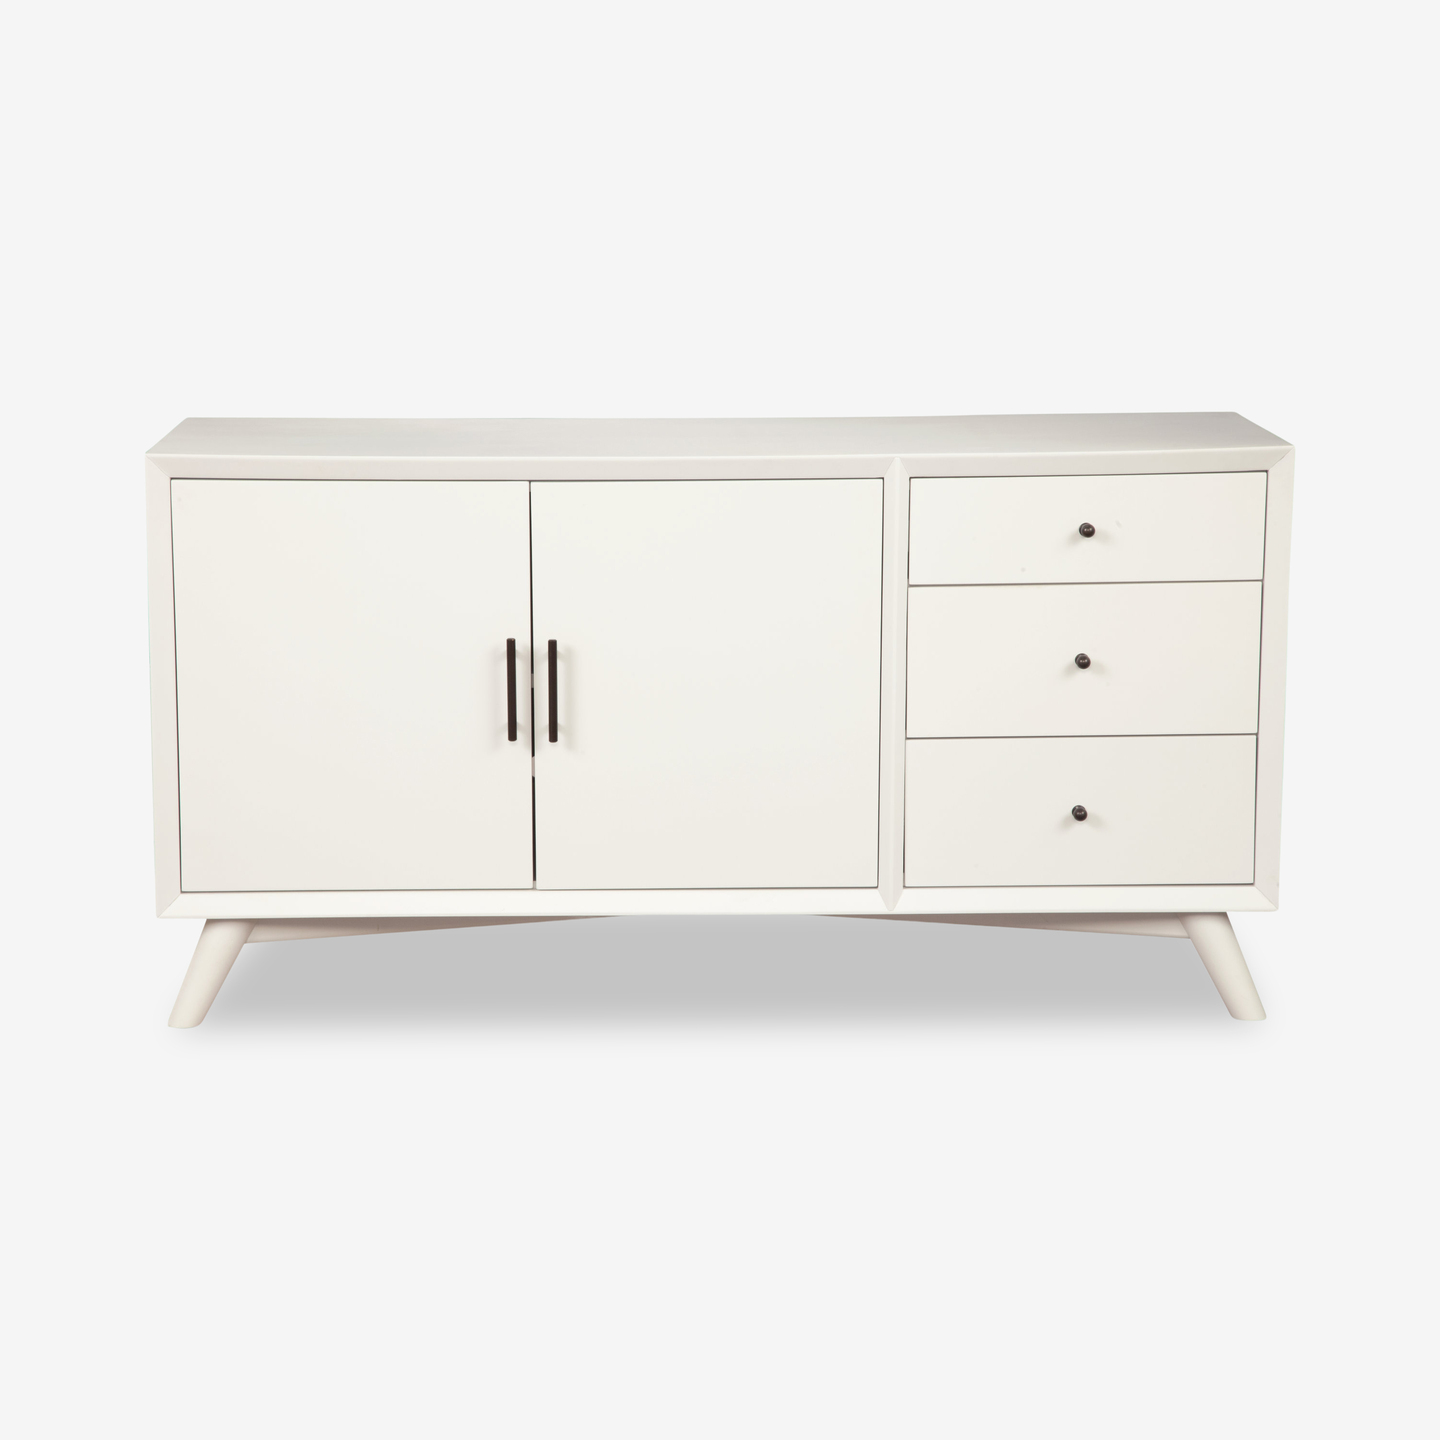 1403_Cheney-Sideboard-White_Front_2021